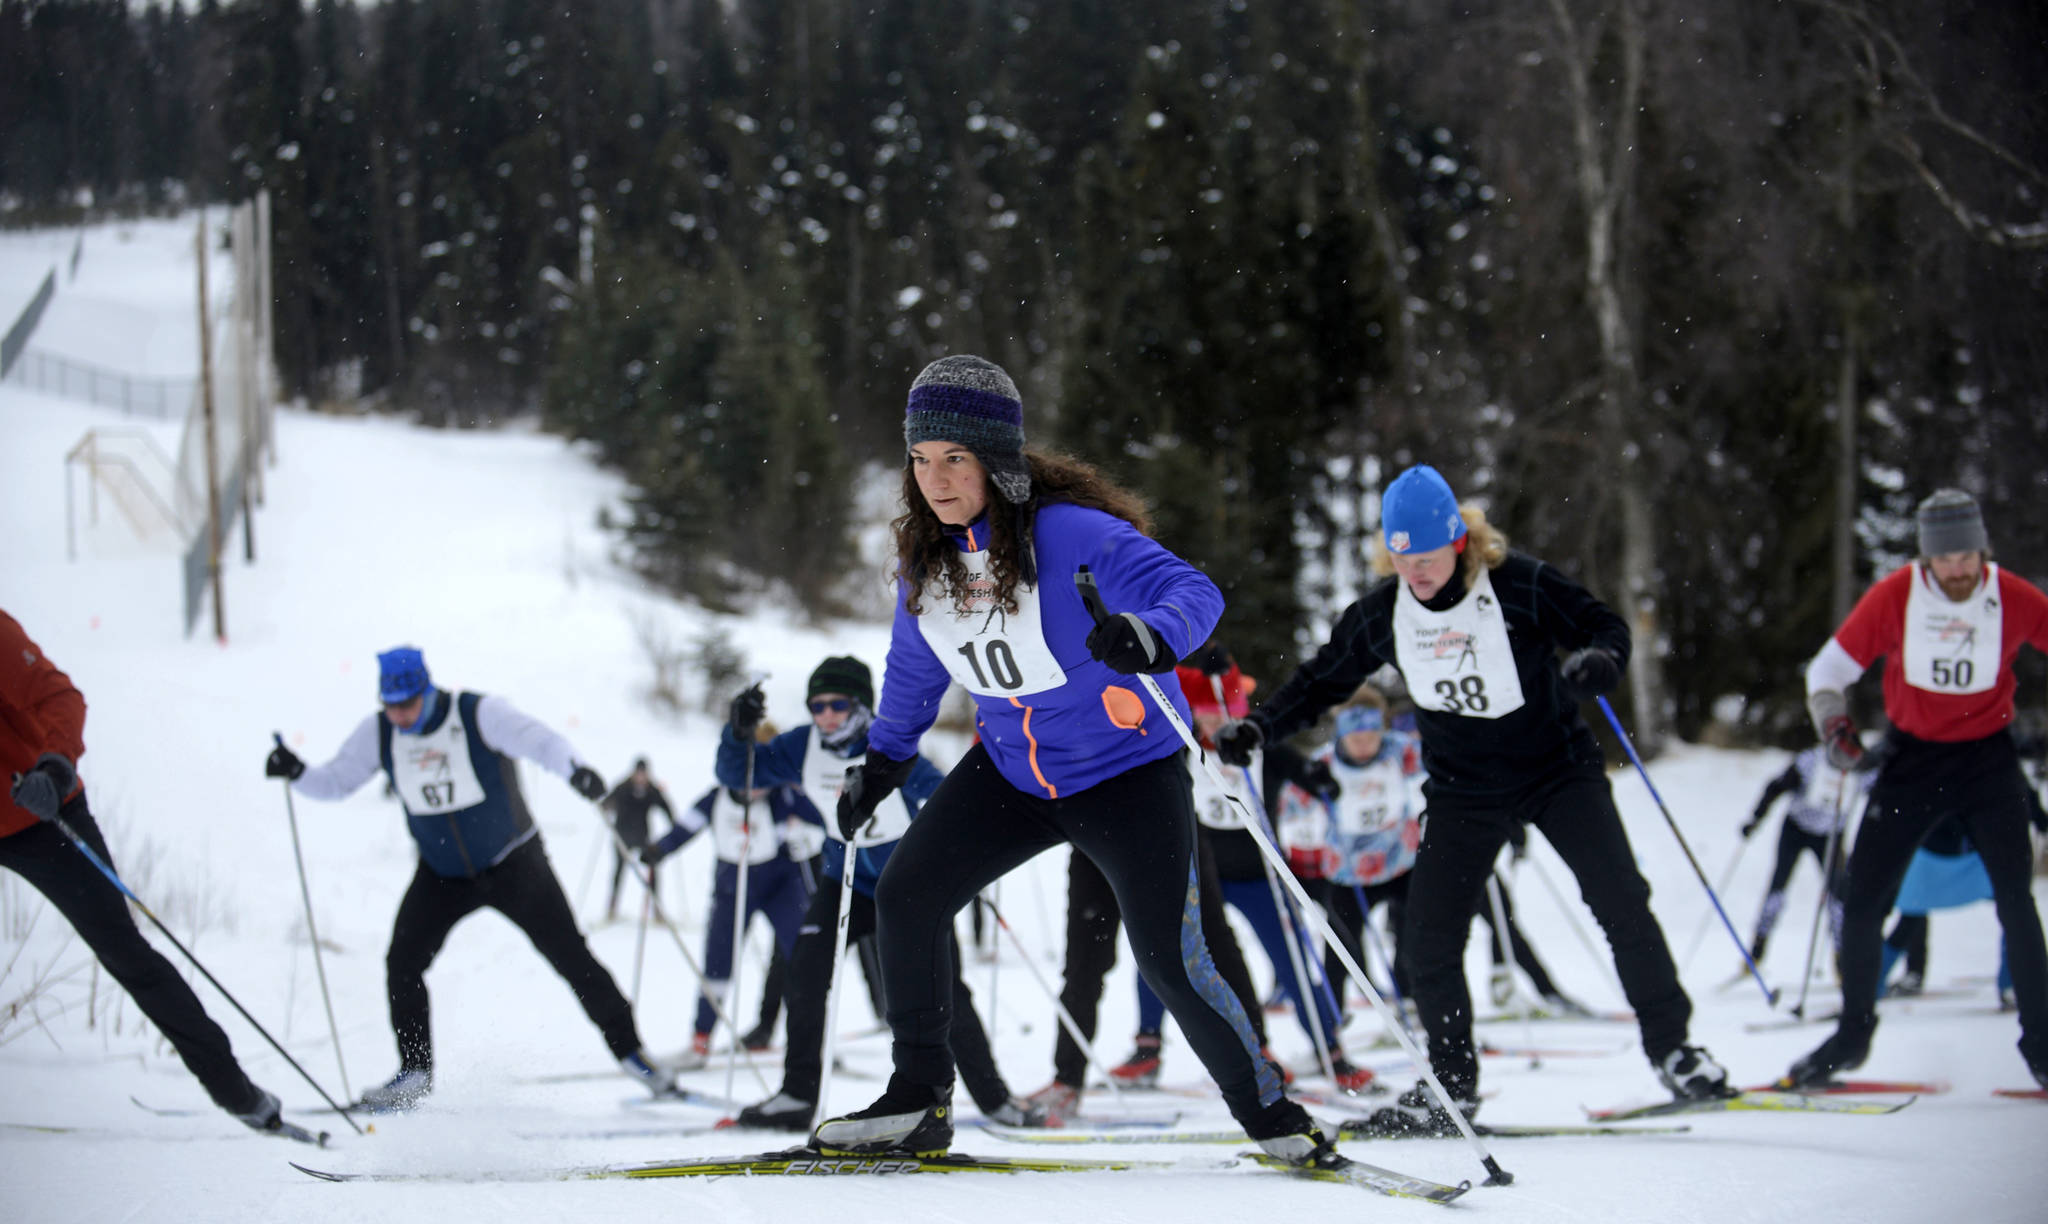 Skiers in the 20-kilometer Tour of Tsalteshi ski race reach the top of their first hill on Sunday, Feb. 18, 2018, in Soldotna, Alaska. This year was the first for the Tour of Tsalteshi, in which 60 entrants raced the entire 20 kilometers of the volunteer-maintained Tsalteshi Trails ski course, while 11 raced two laps for a total of 40 kilometers.